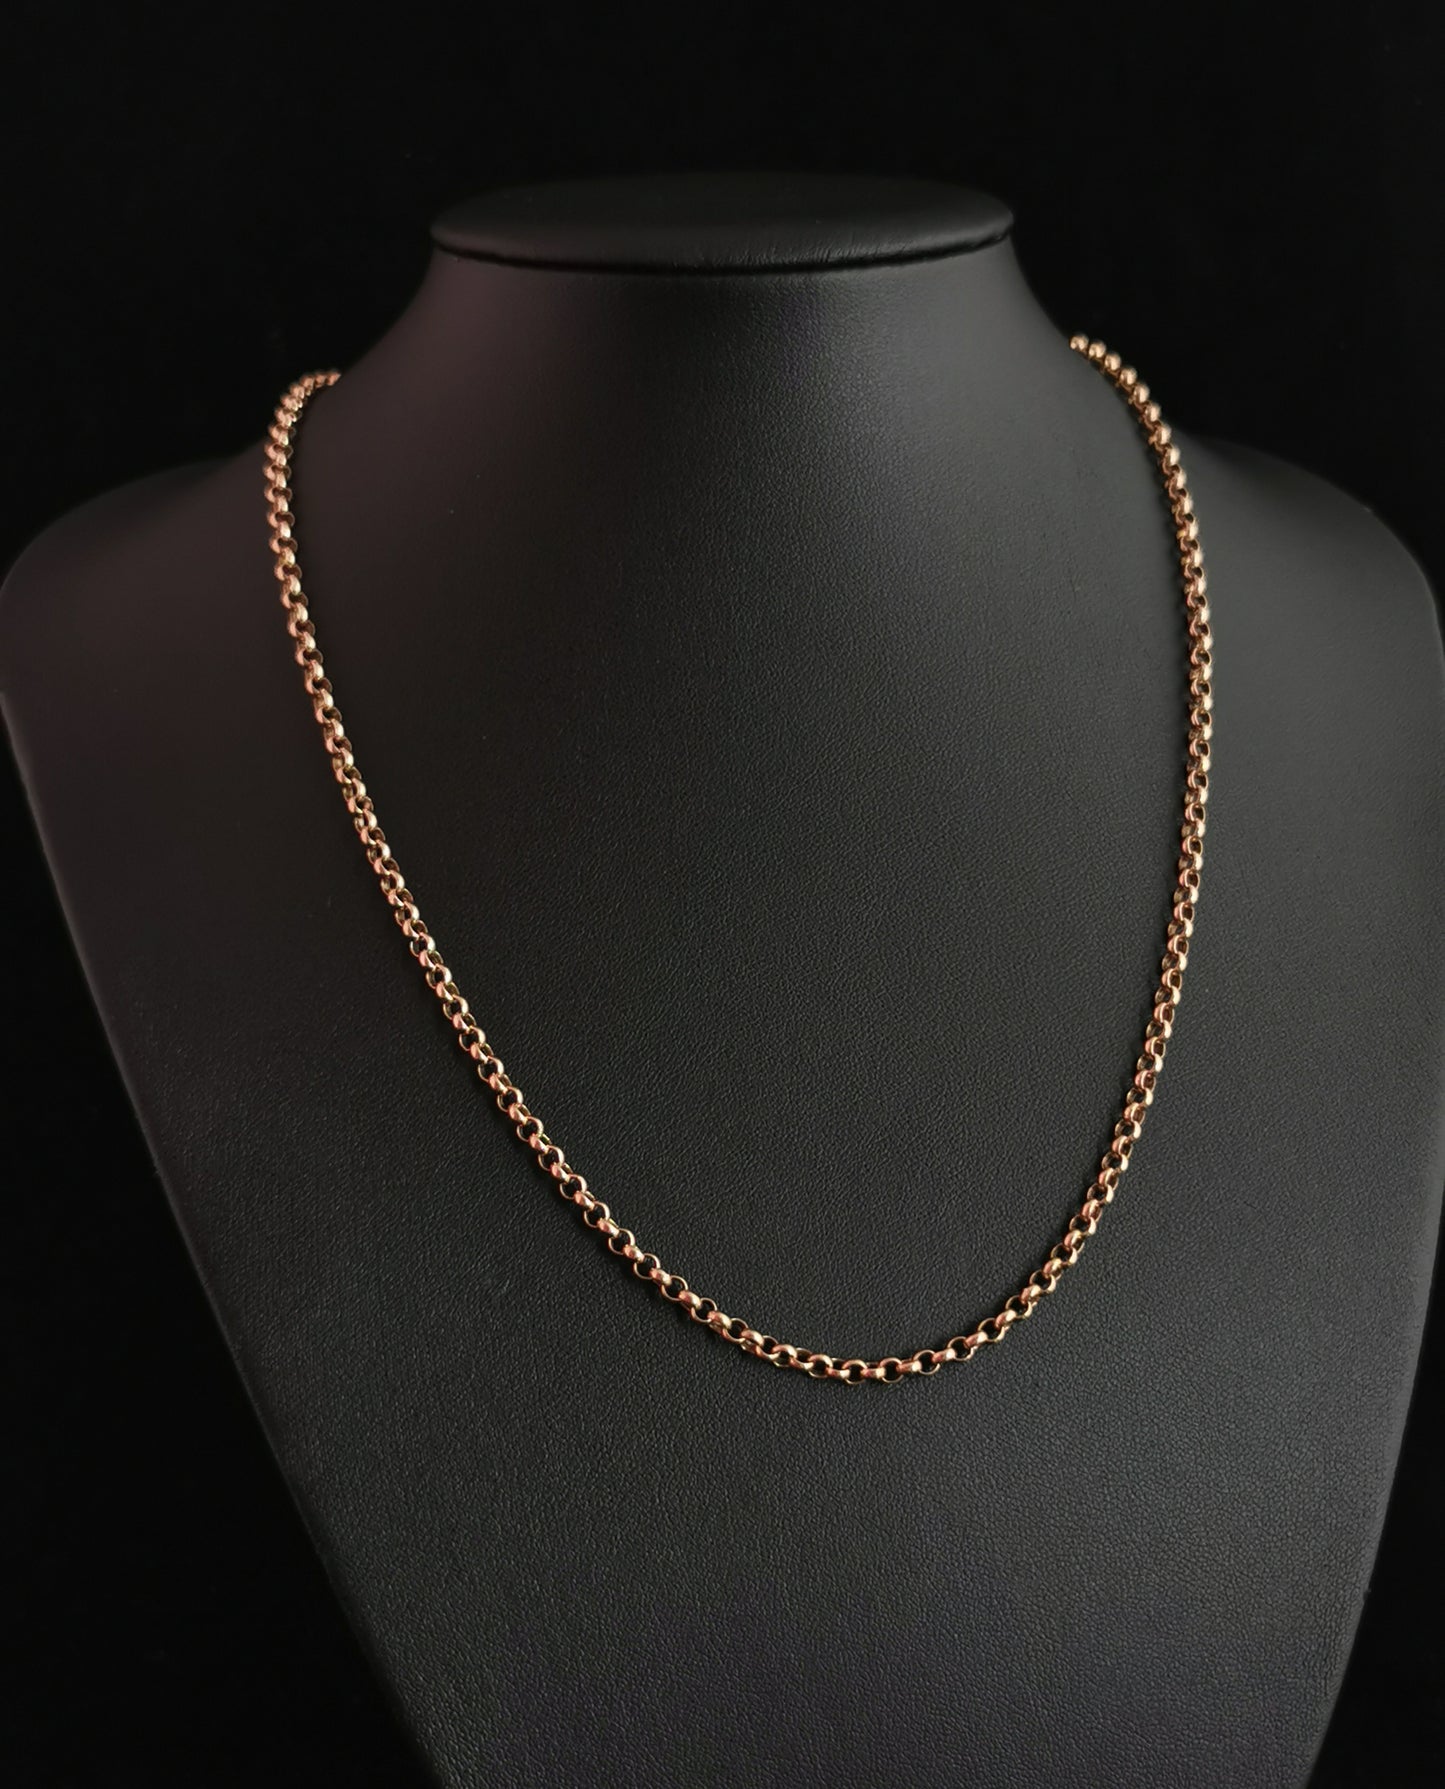 Vintage 9ct yellow gold Belcher link chain necklace, rolo link